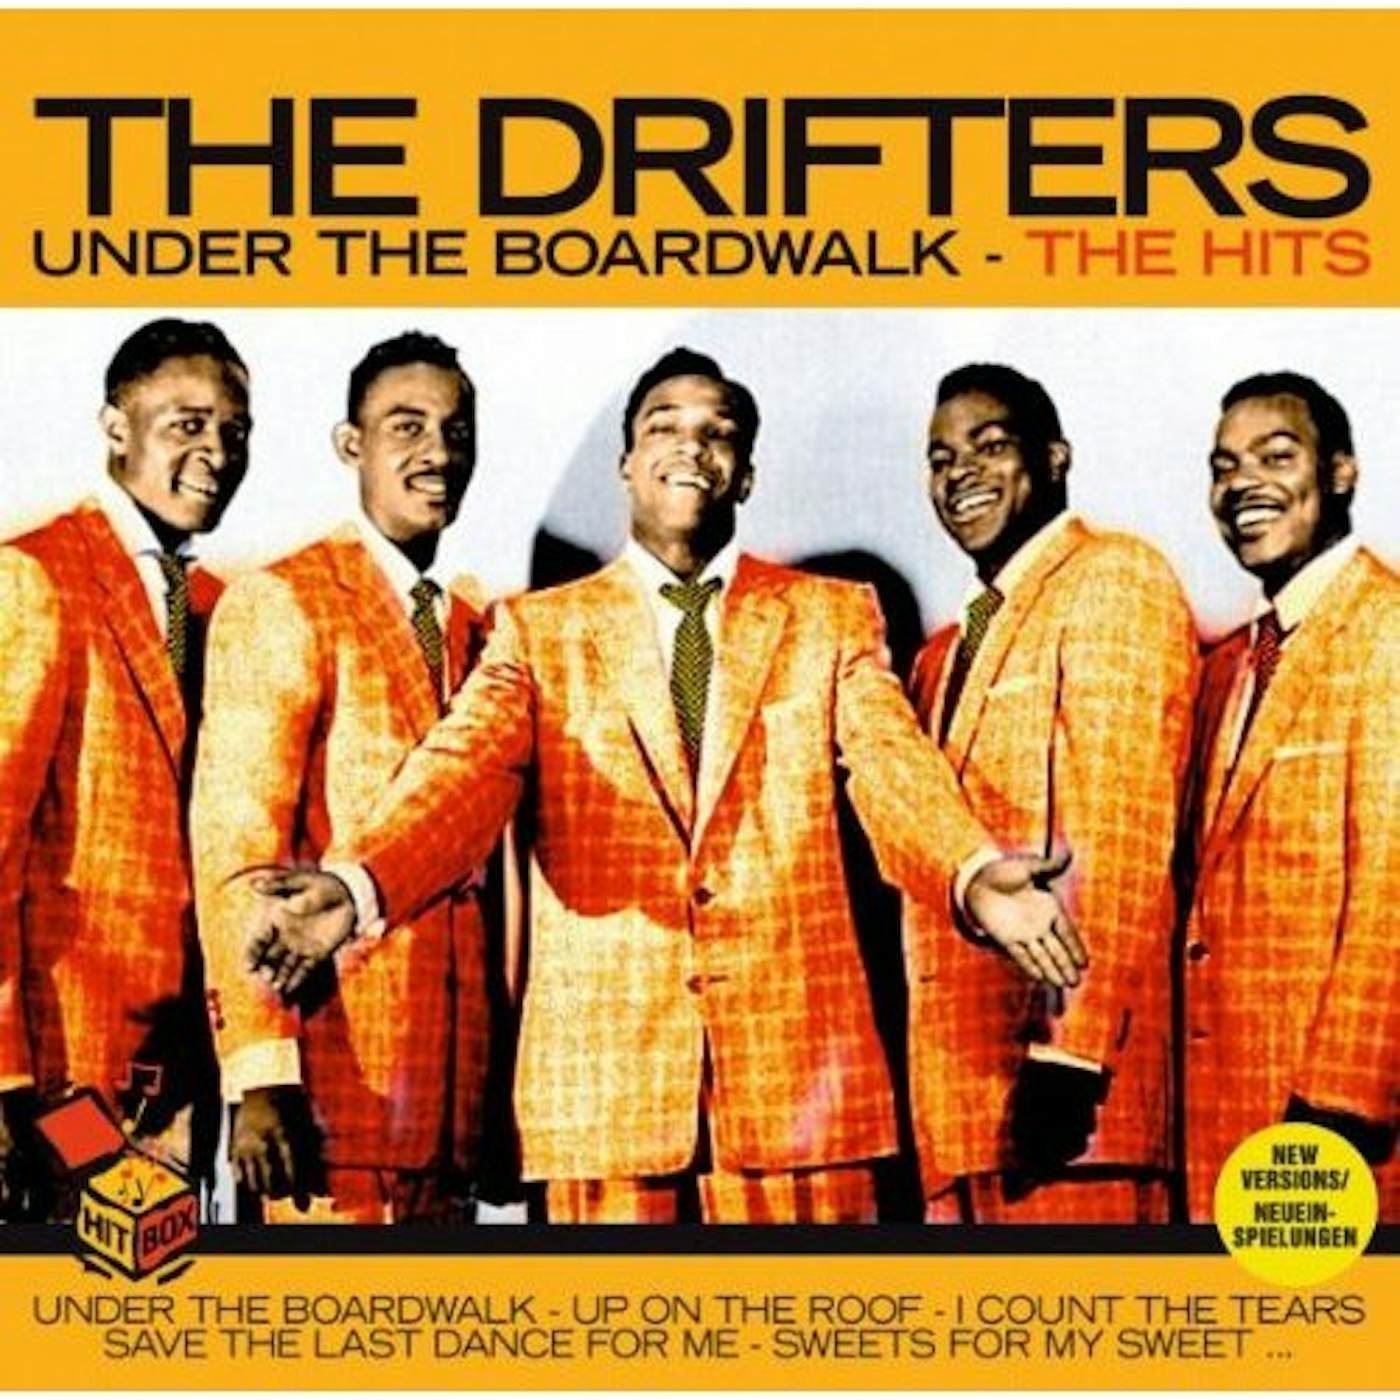 The Drifters UNDER THE BOARDWALK-THE HITS CD